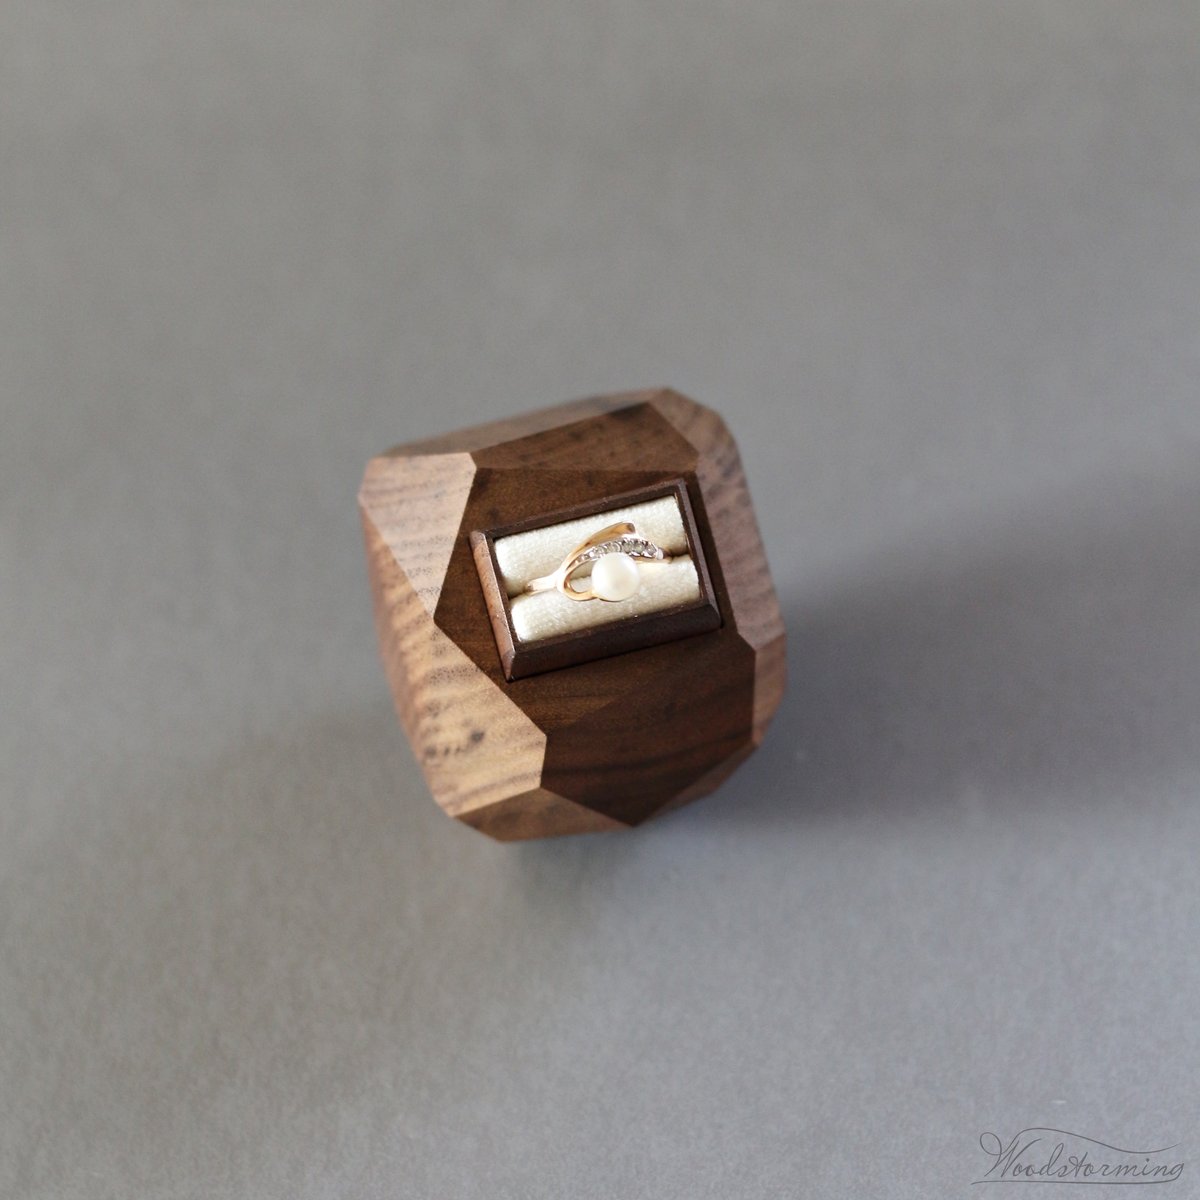 Woodstorming — Ring bearer box - wooden wedding ring box - large faceted  ring box with a drawer by Woodstorming